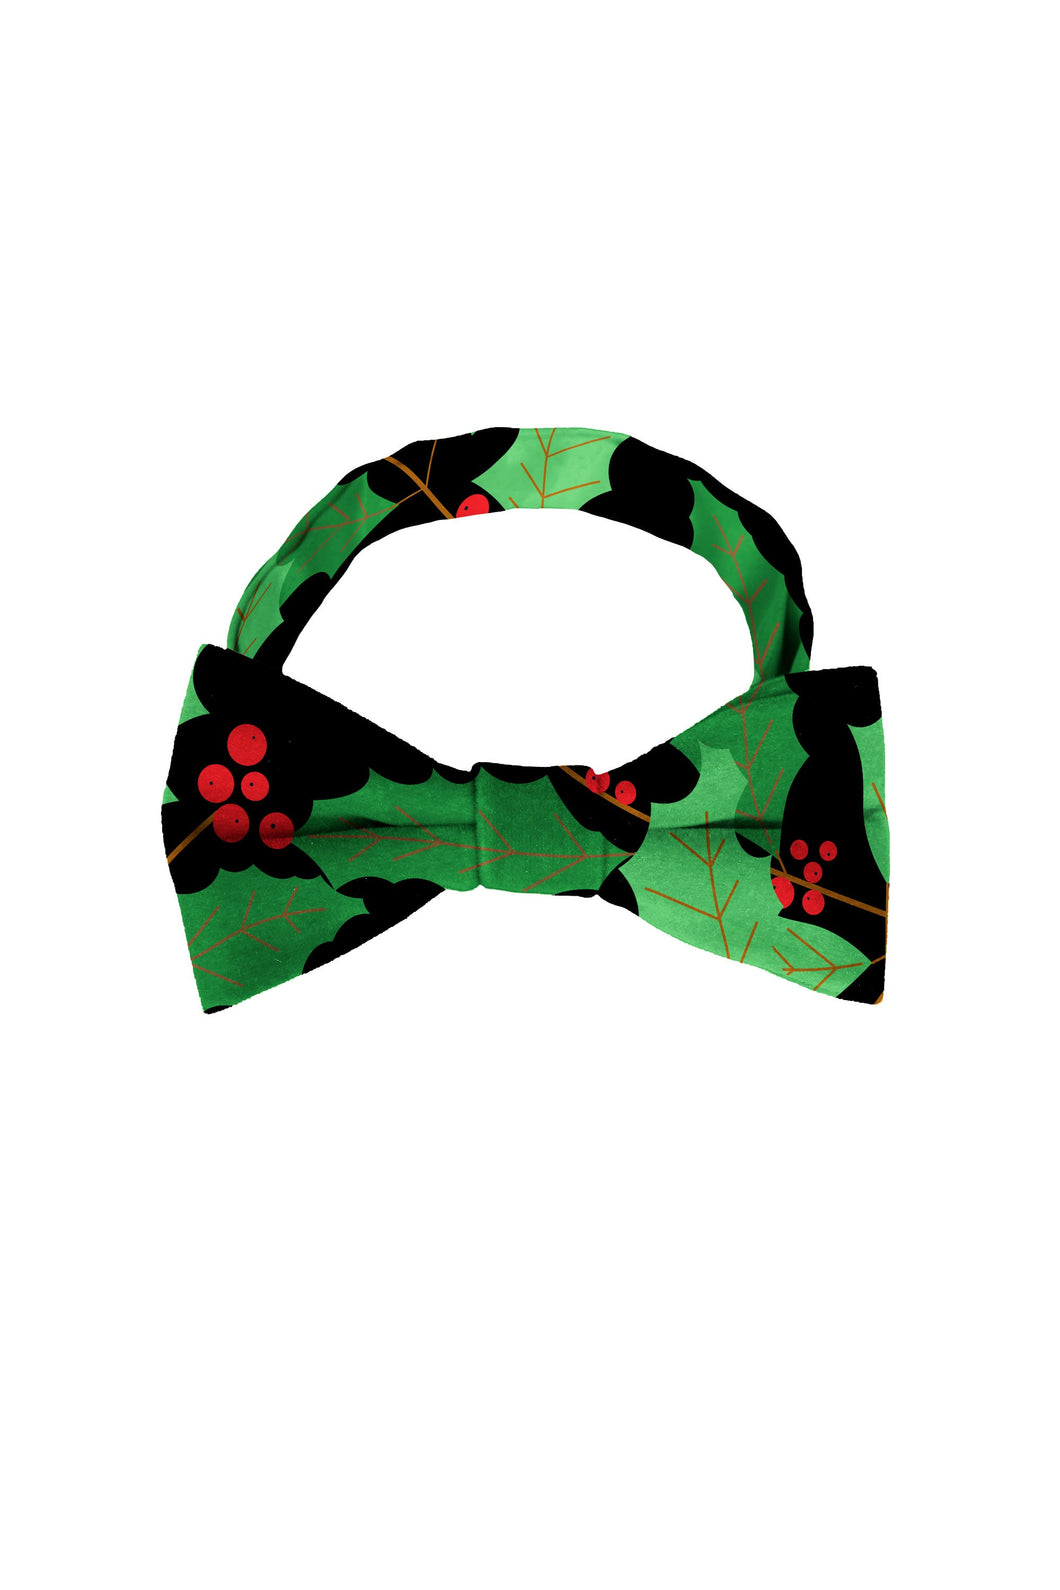 The Deck Yourselves | Holly Print Christmas Bow Tie